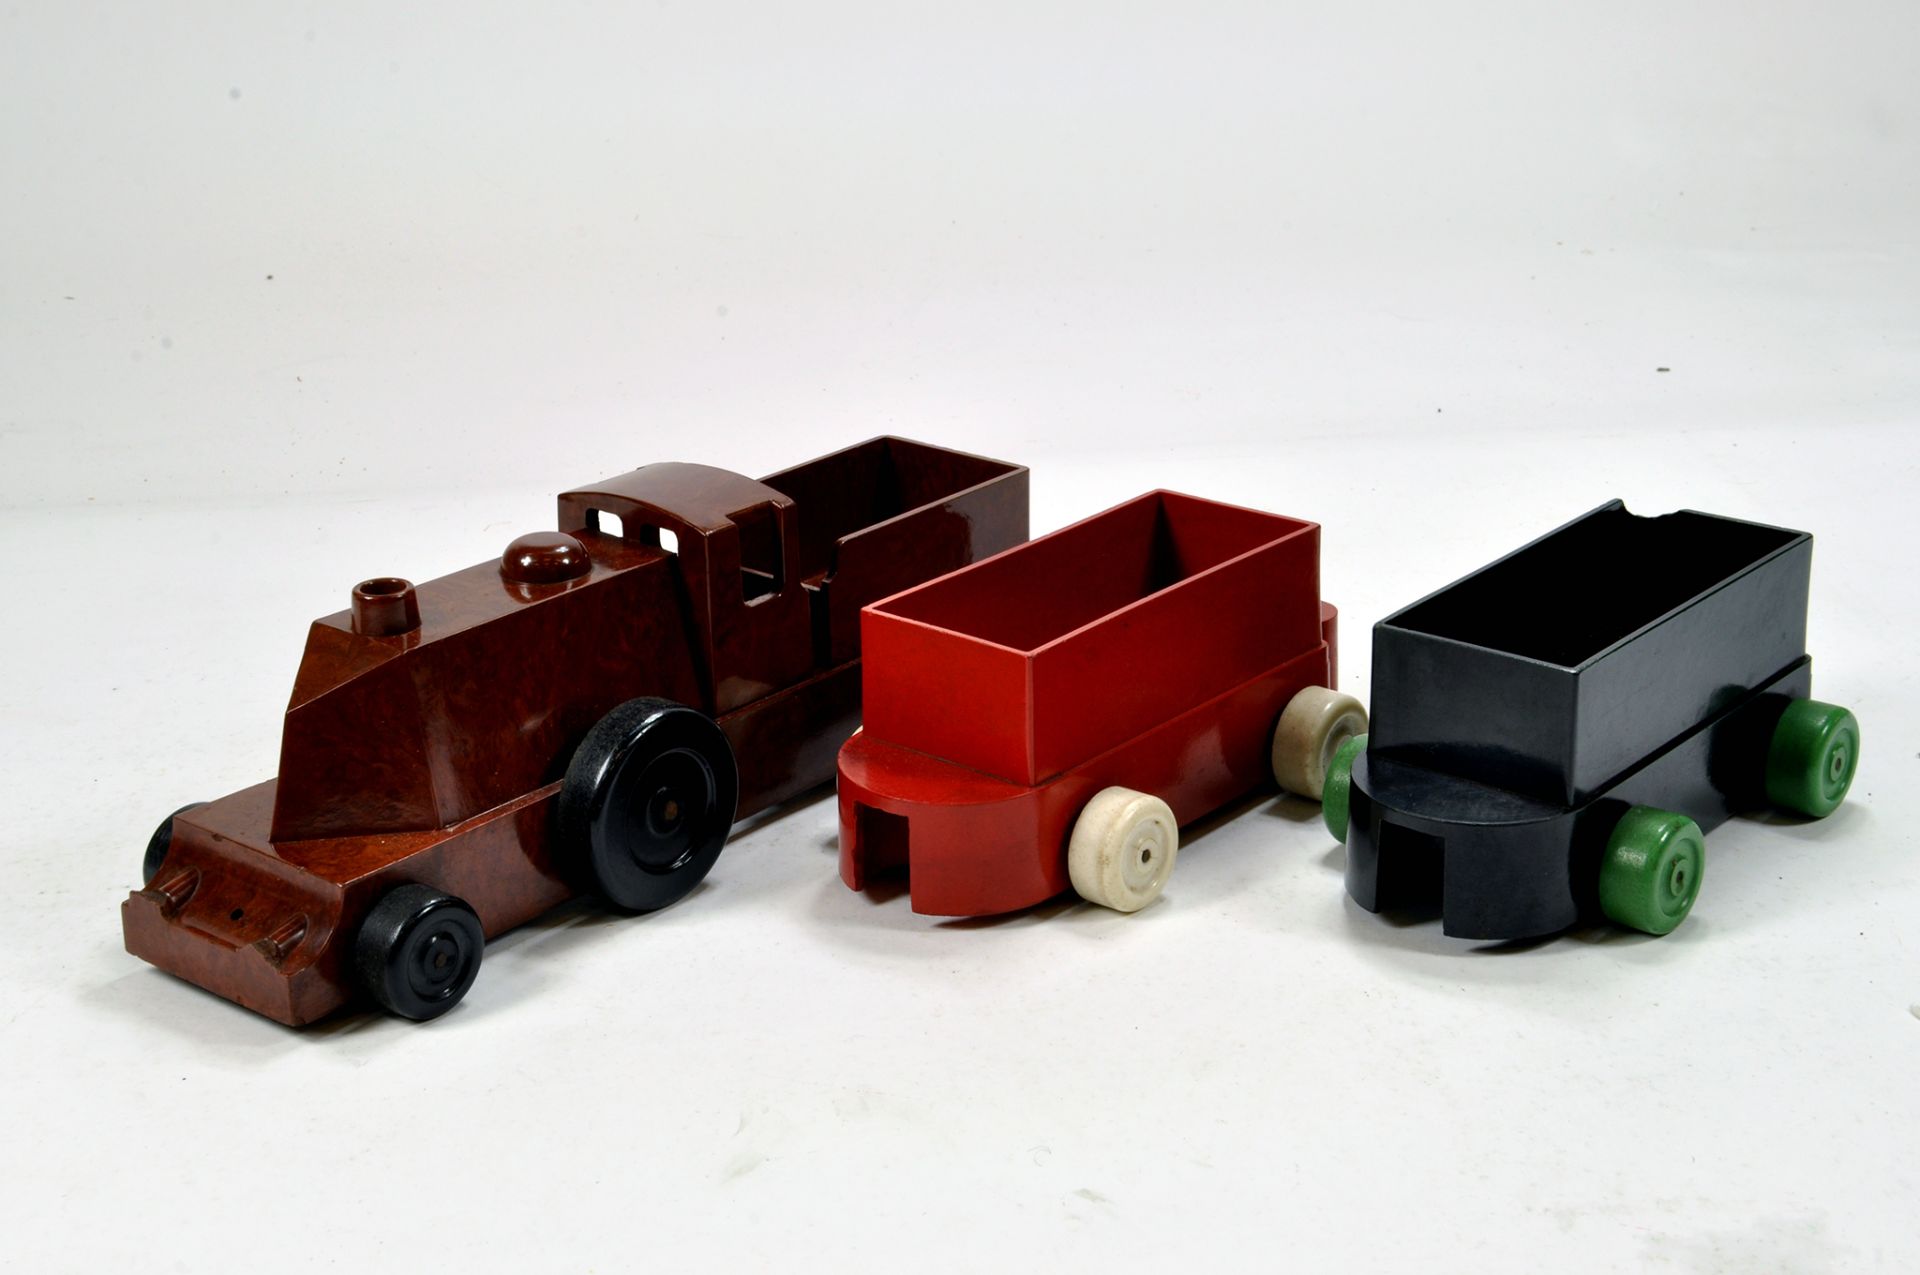 Hard to find Chad Valley Bakelite issue Railway Toys including Locomotive and Wagons. Generally VG